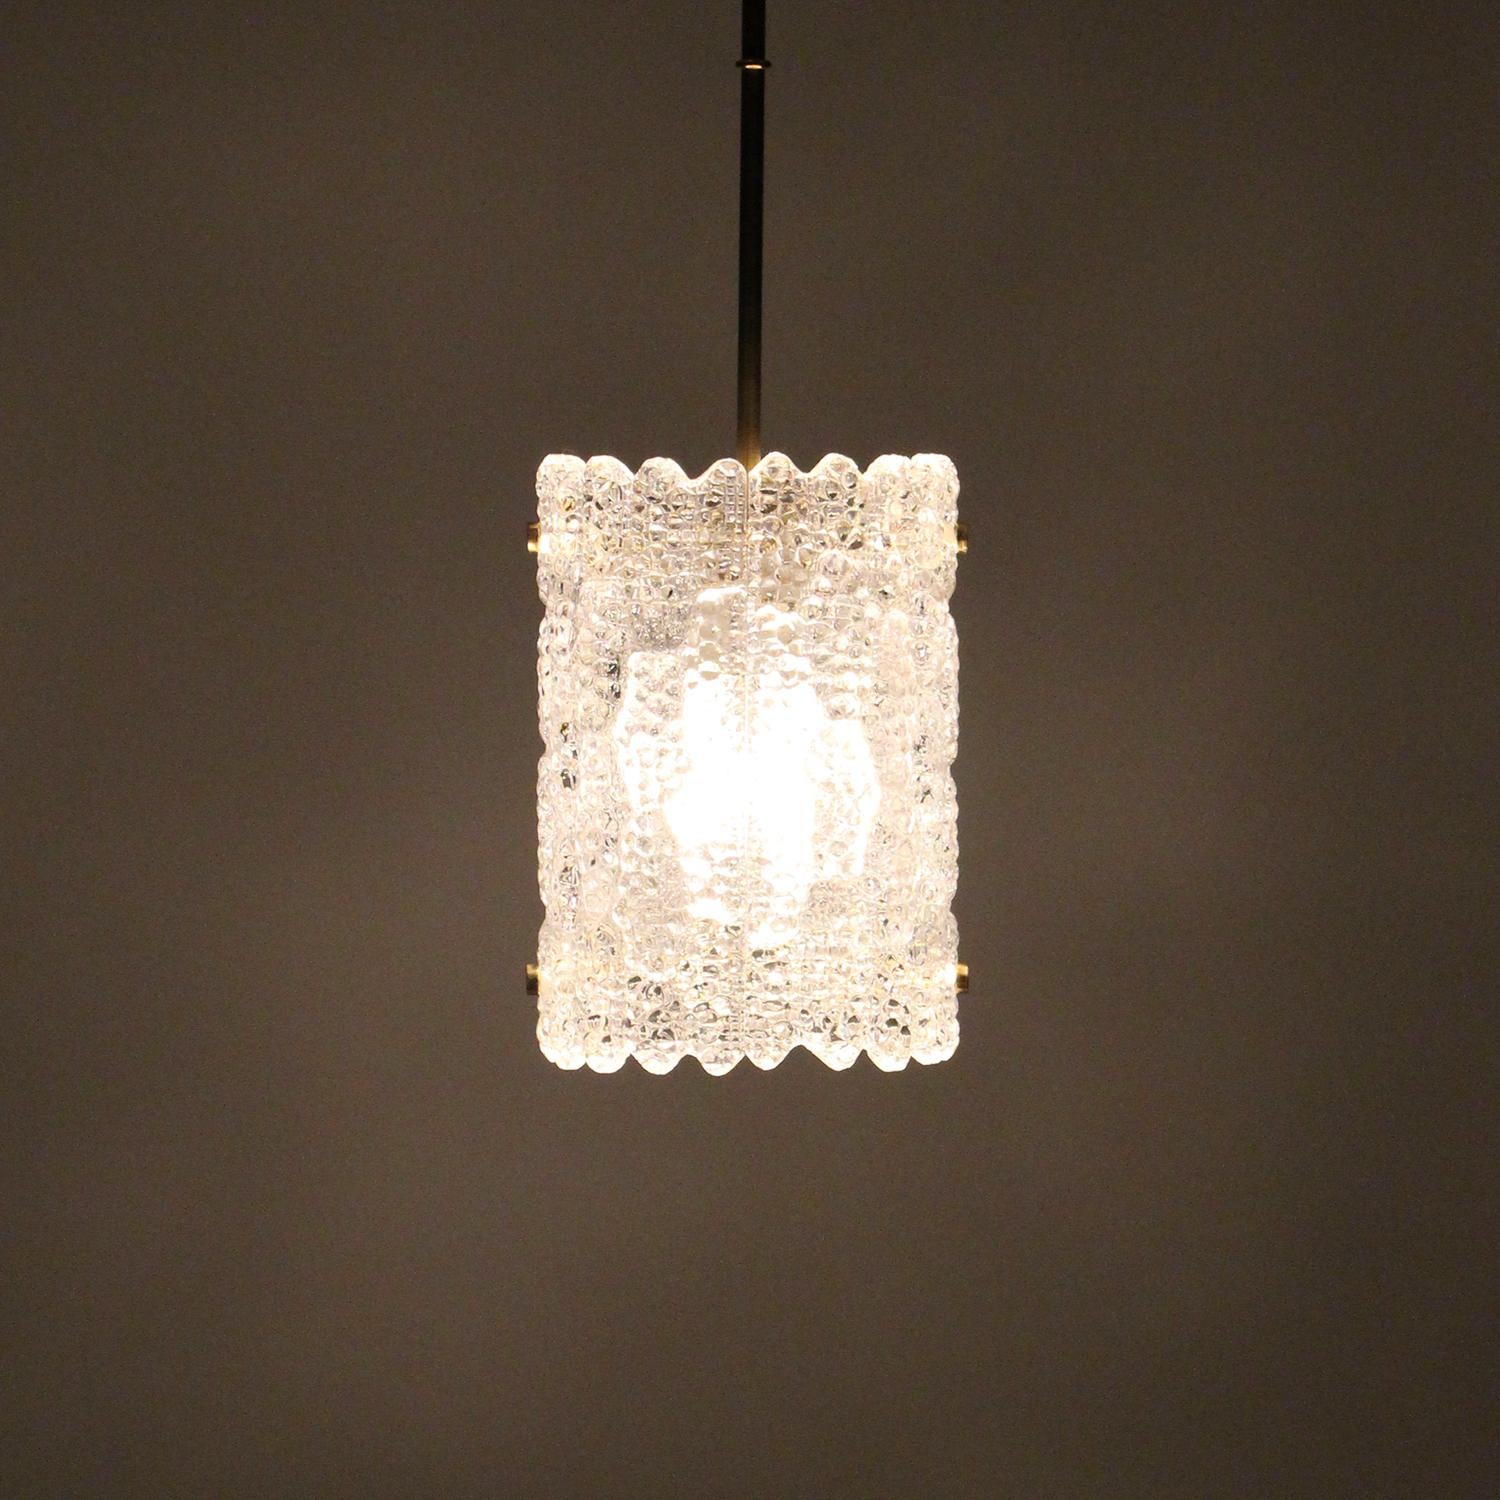 Orrefors Gefion crystal light (P 385), Scandinavian Mid-Century Modern crystal pendant by Carl Fagerlund, produced by the collaboration between Lyfa and Swedish glass-works, Orrefors in the 1960s. Gorgeous ceiling light with crystal glass and brass,